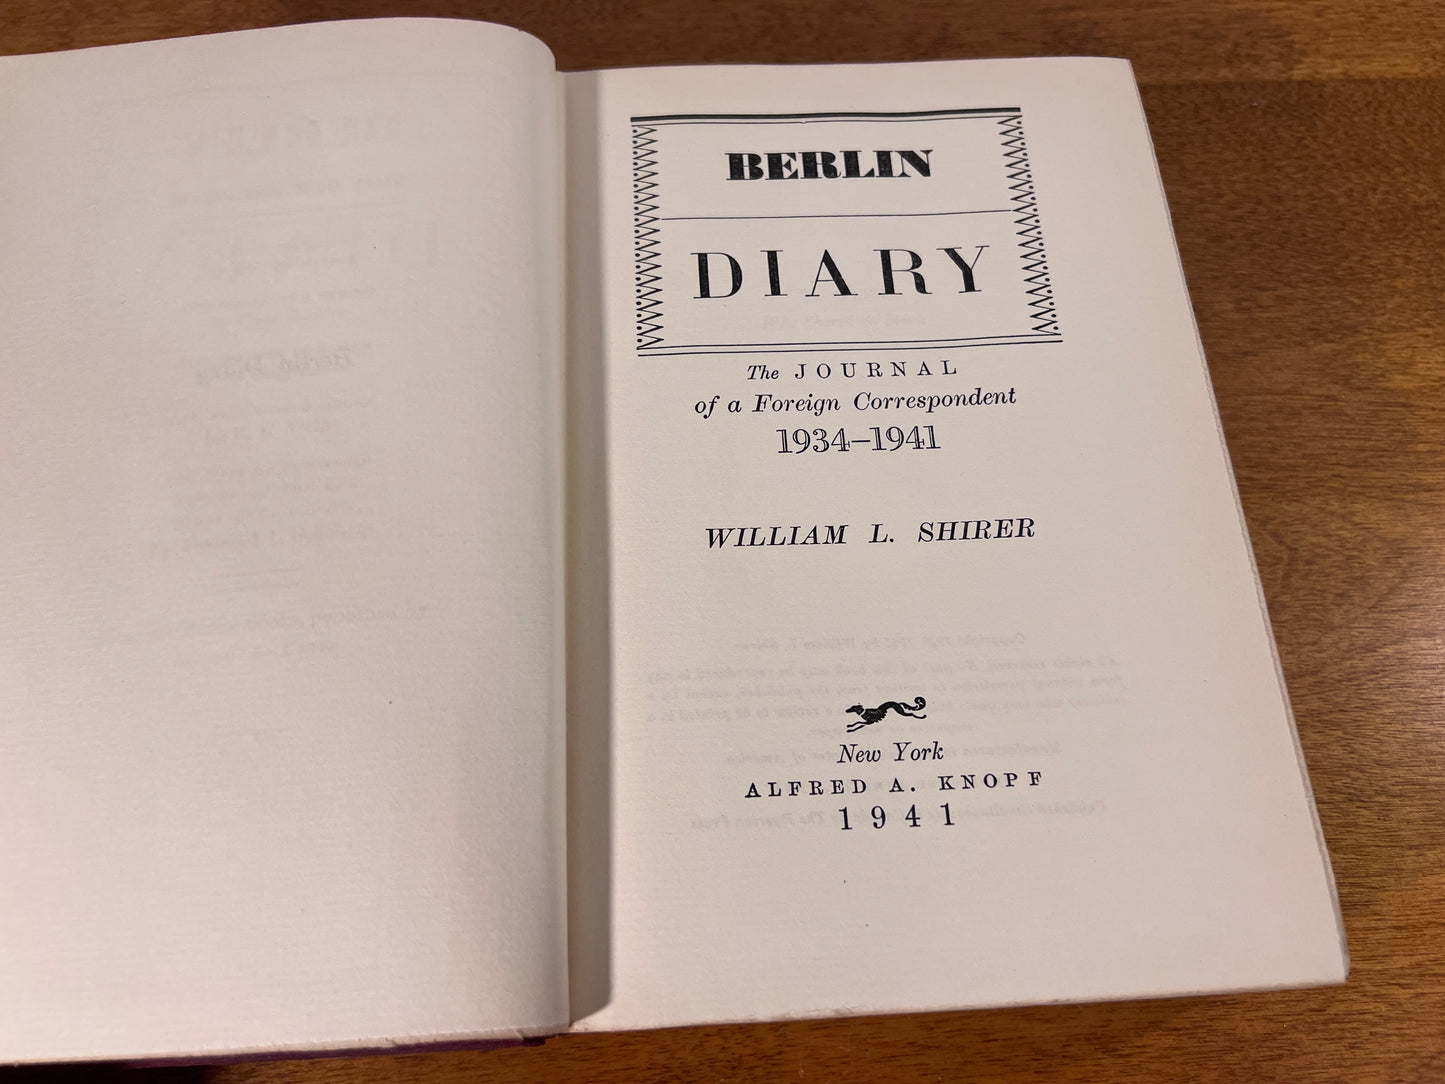 Berlin Diary: Journal of a Foreign Correspondent by William Shirer